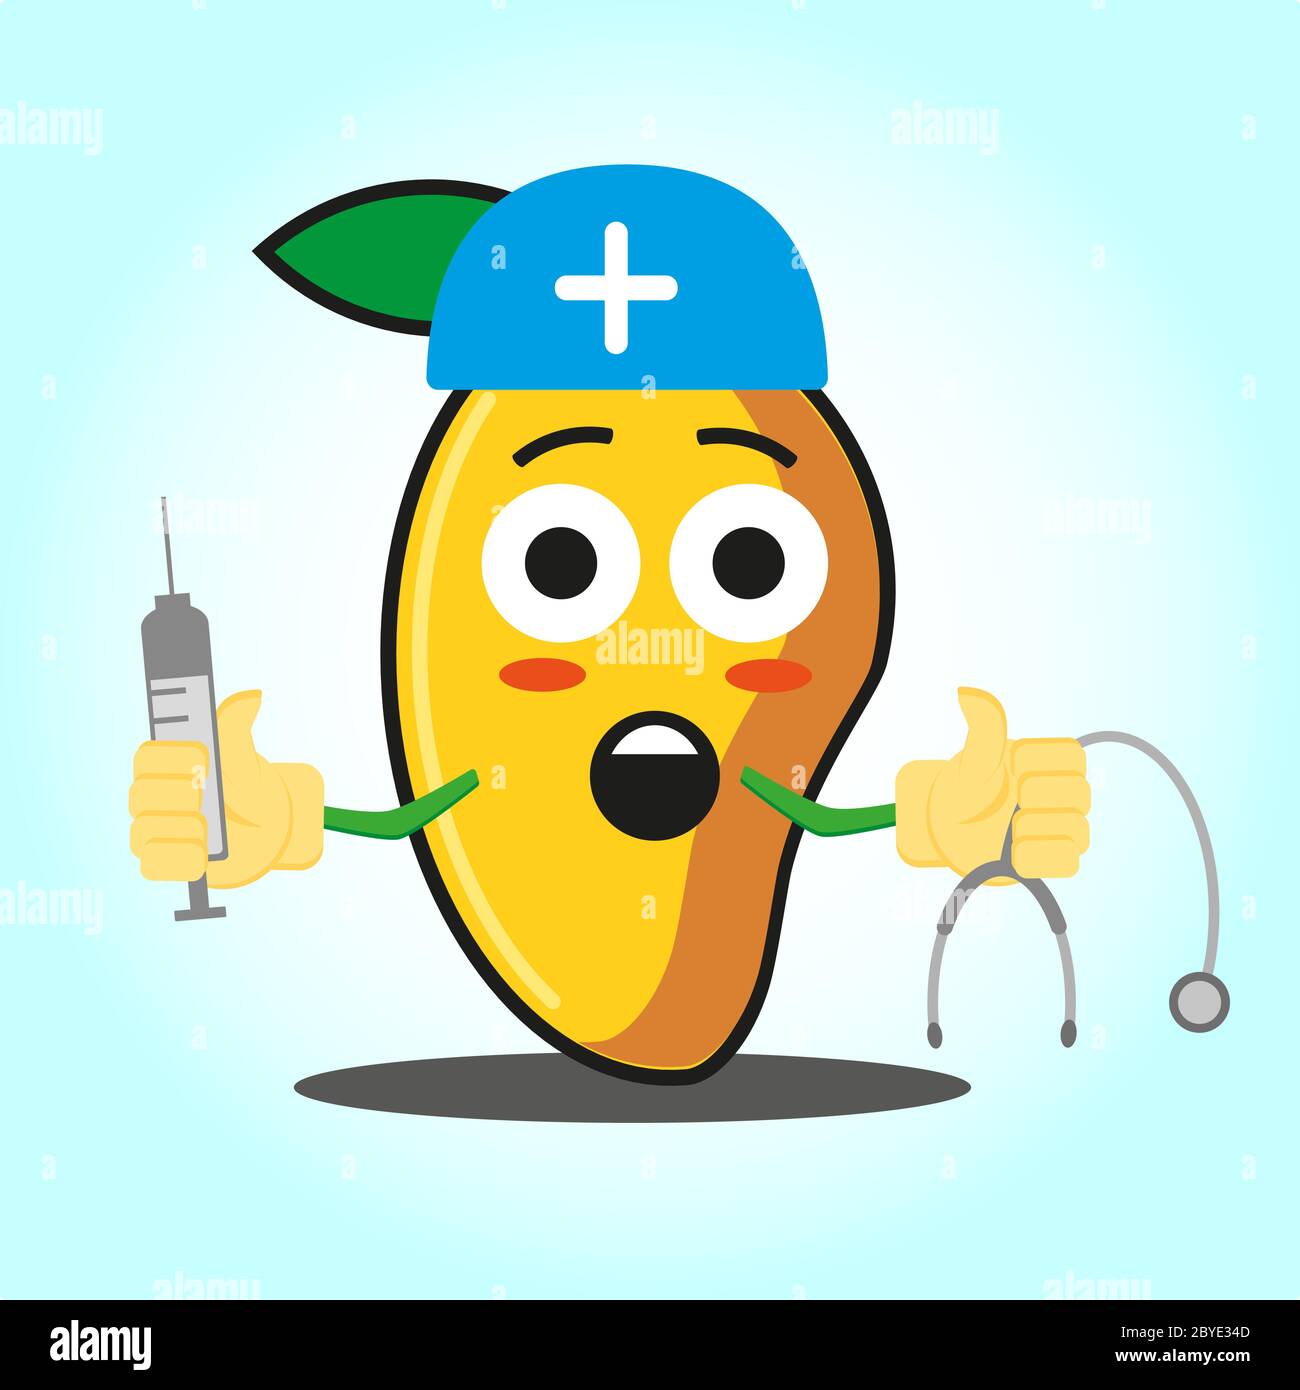 Cute mango doctor cartoon face character with stethoskop and syringe image design Stock Vector